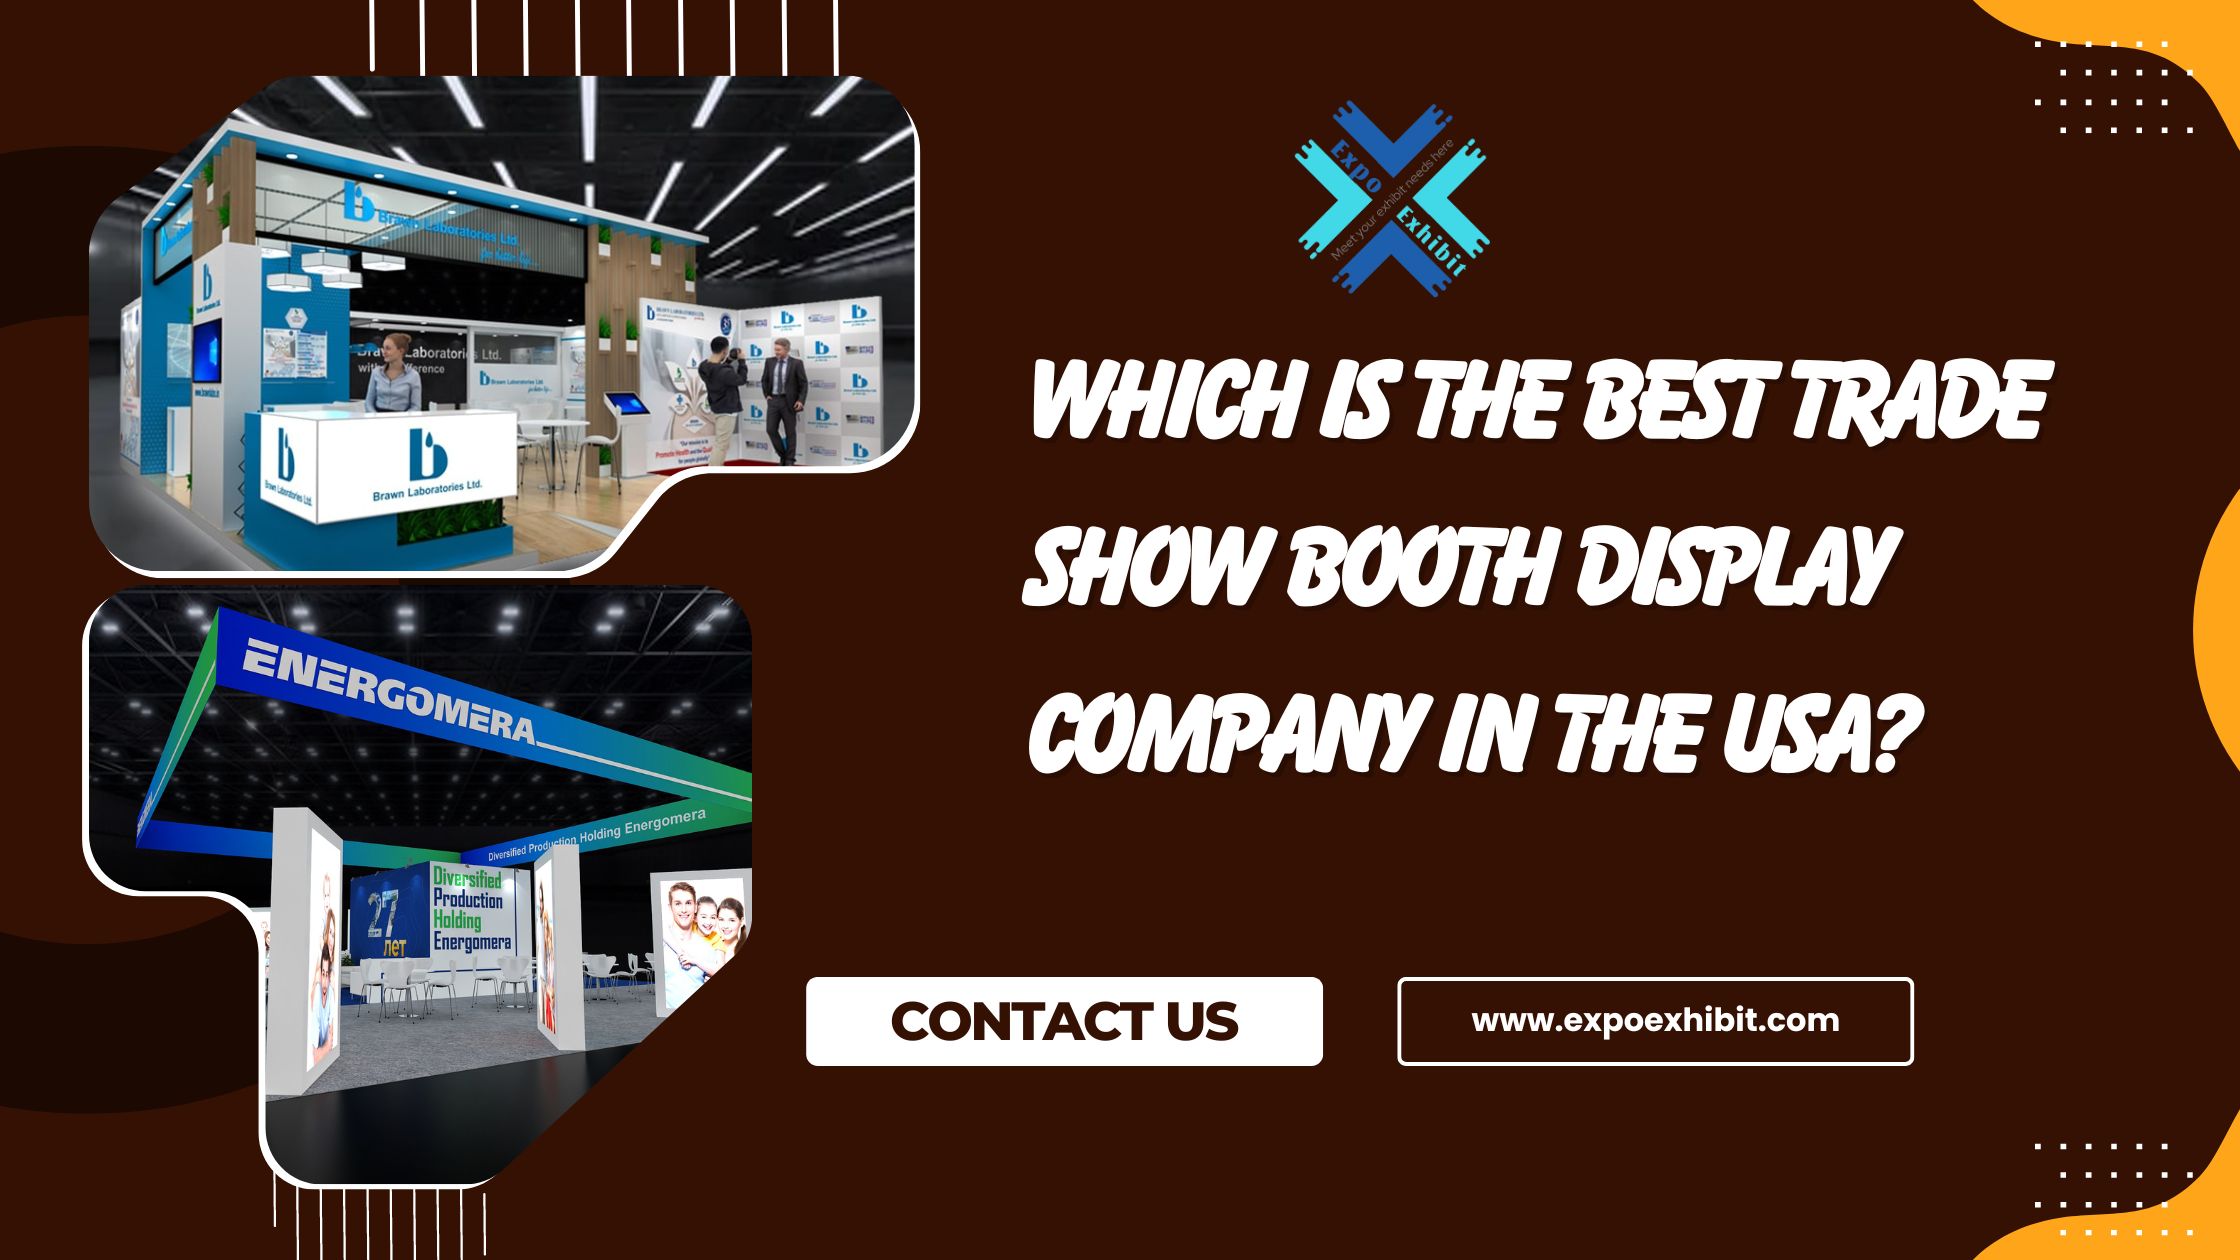 Which is the best Trade show booth display company in the USA?